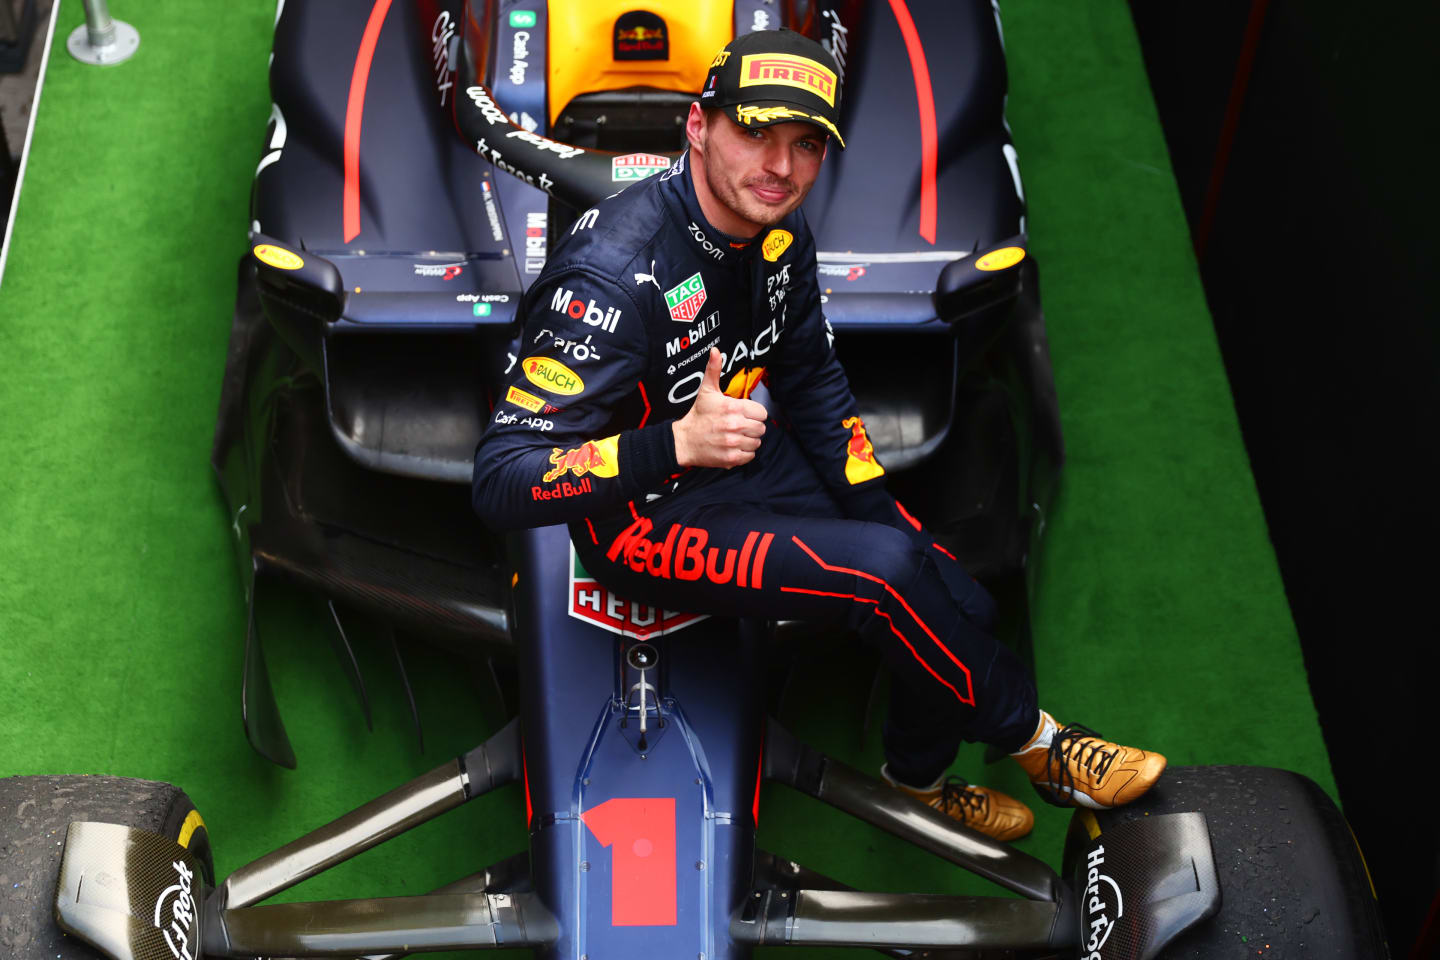 MEXICO CITY, MEXICO - OCTOBER 30: Race winner Max Verstappen of the Netherlands and Oracle Red Bull Racing celebrates on the podium after the F1 Grand Prix of Mexico at Autodromo Hermanos Rodriguez on October 30, 2022 in Mexico City, Mexico. (Photo by Dan Istitene - Formula 1/Formula 1 via Getty Images)